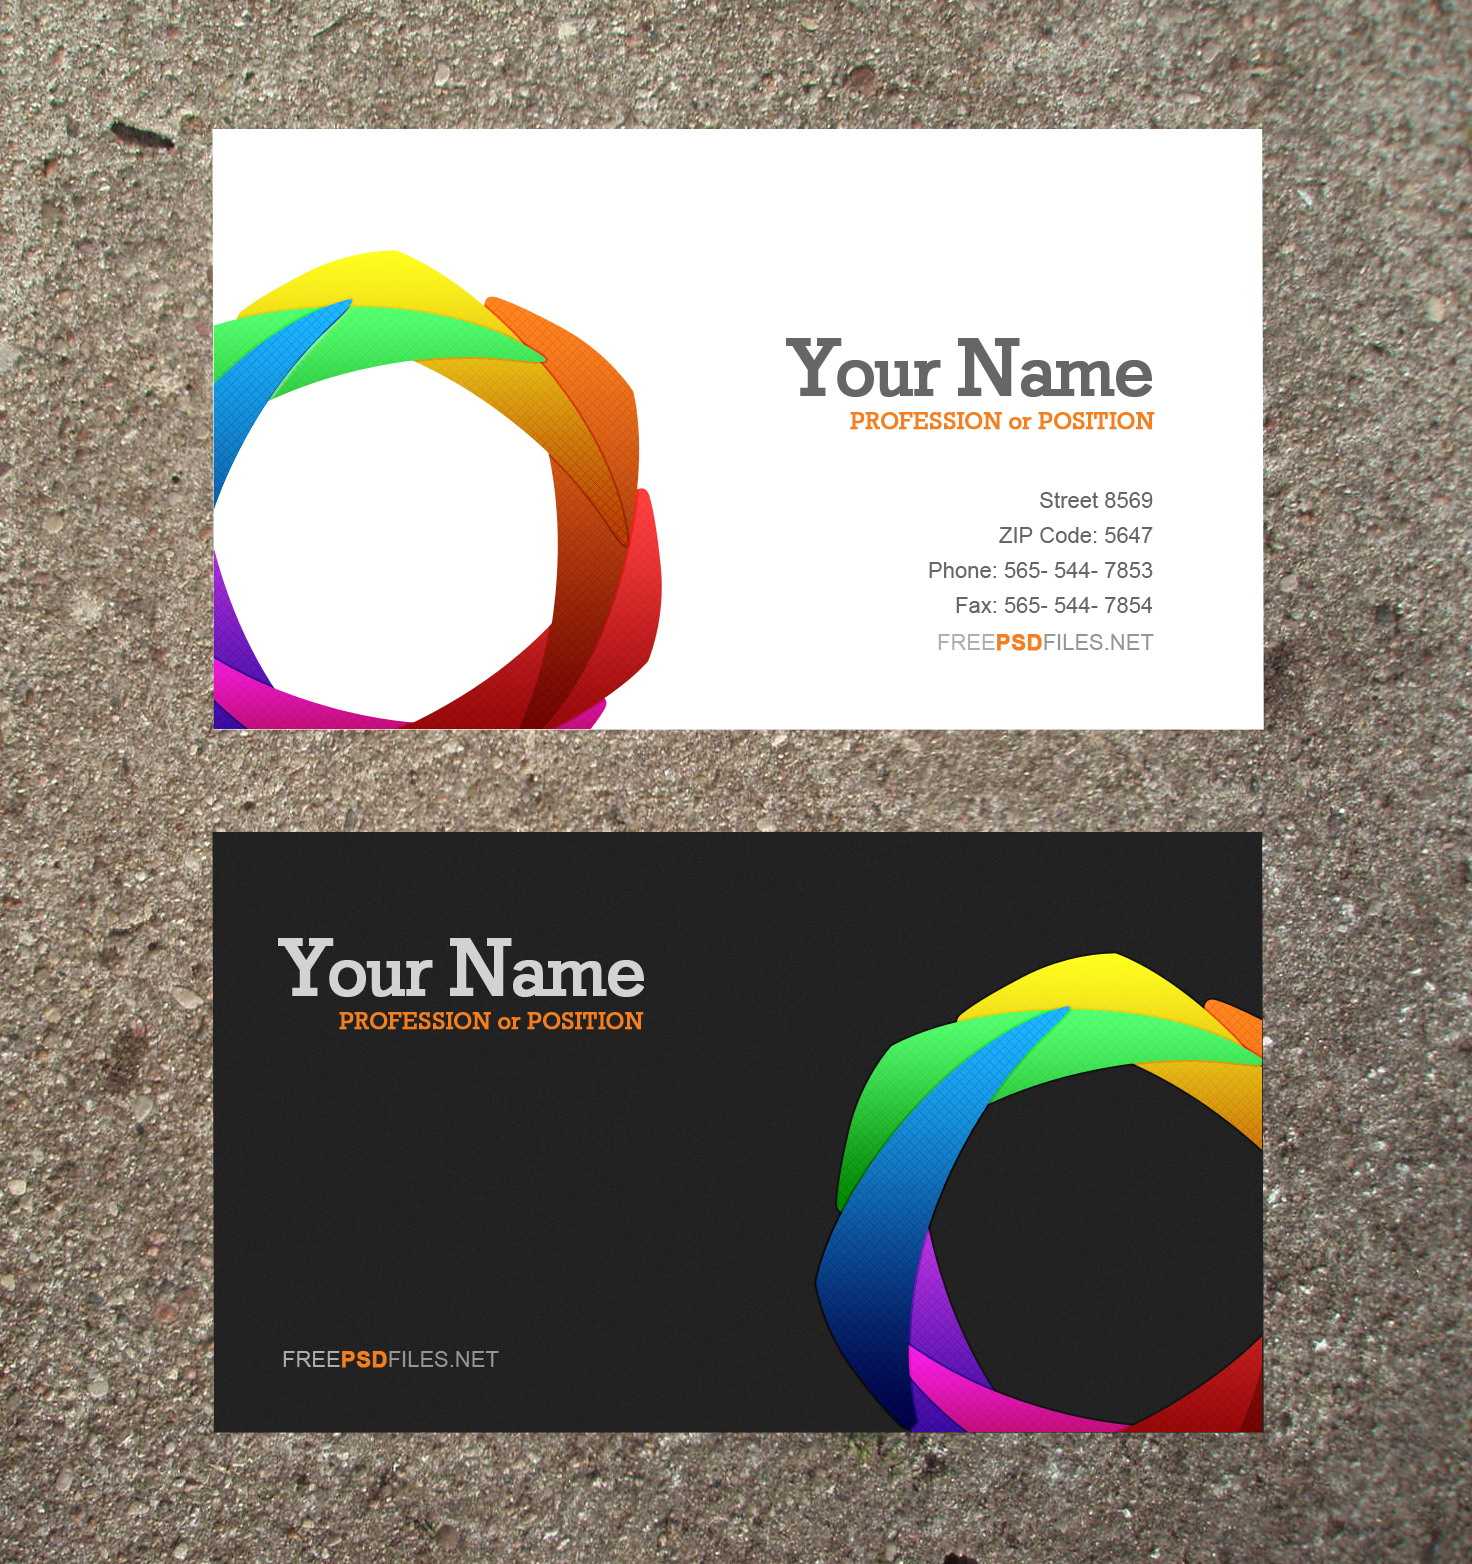 16 Business Card Templates Images – Free Business Card Throughout Business Card Template Word 2010